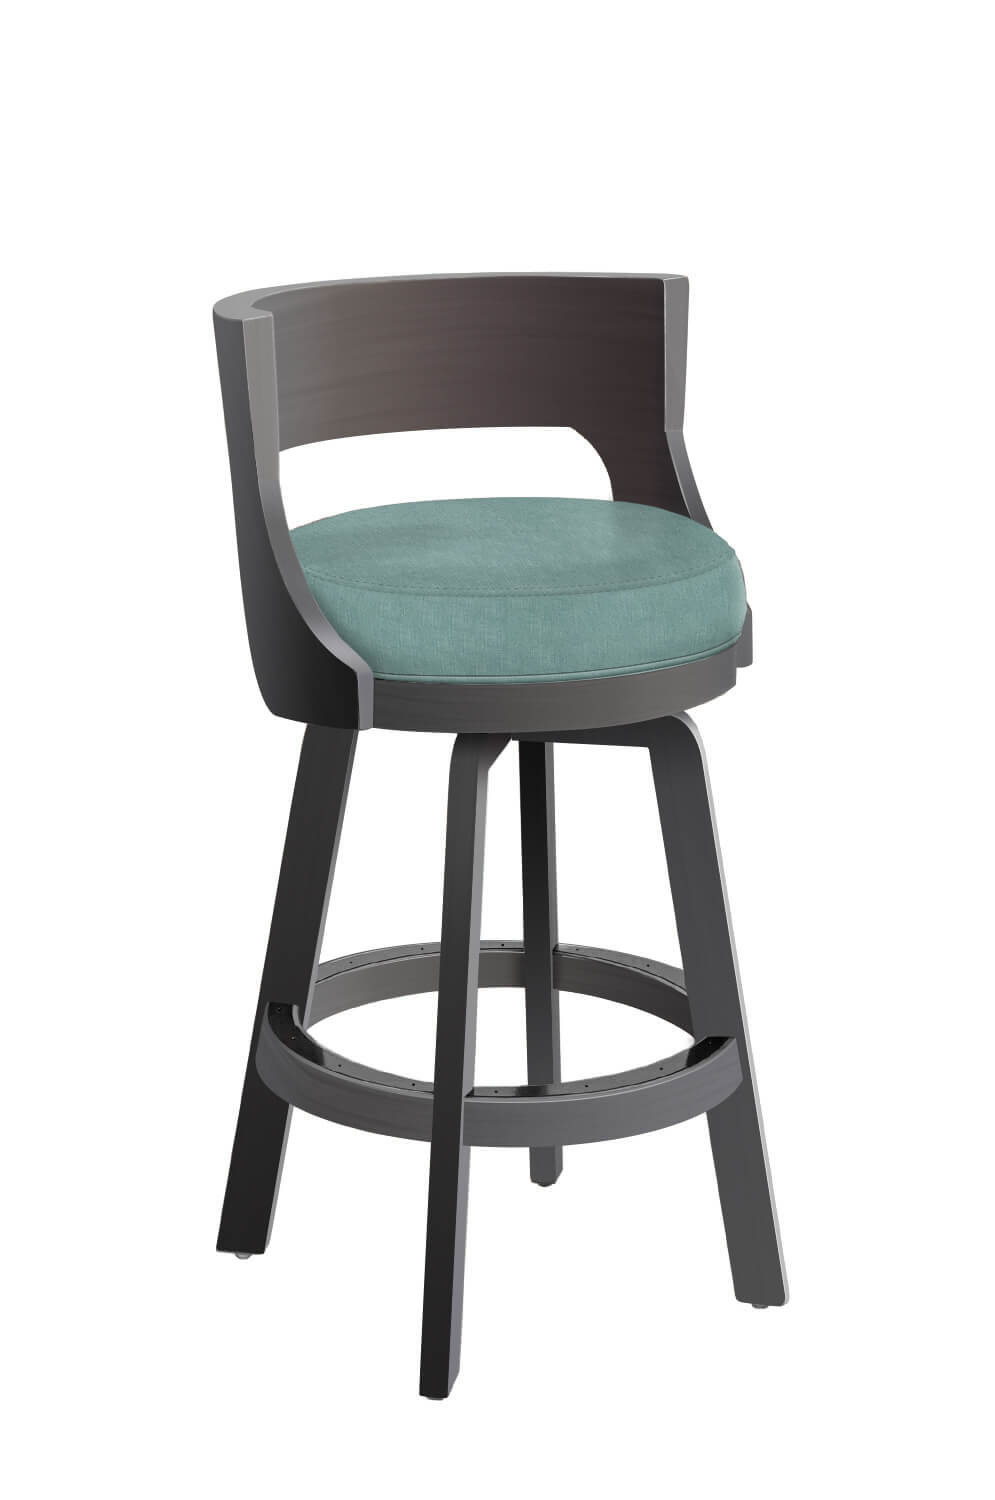 Darafeev's Gen Espresso Wood Bar Stool with Low Back and Teal Seat Fabric